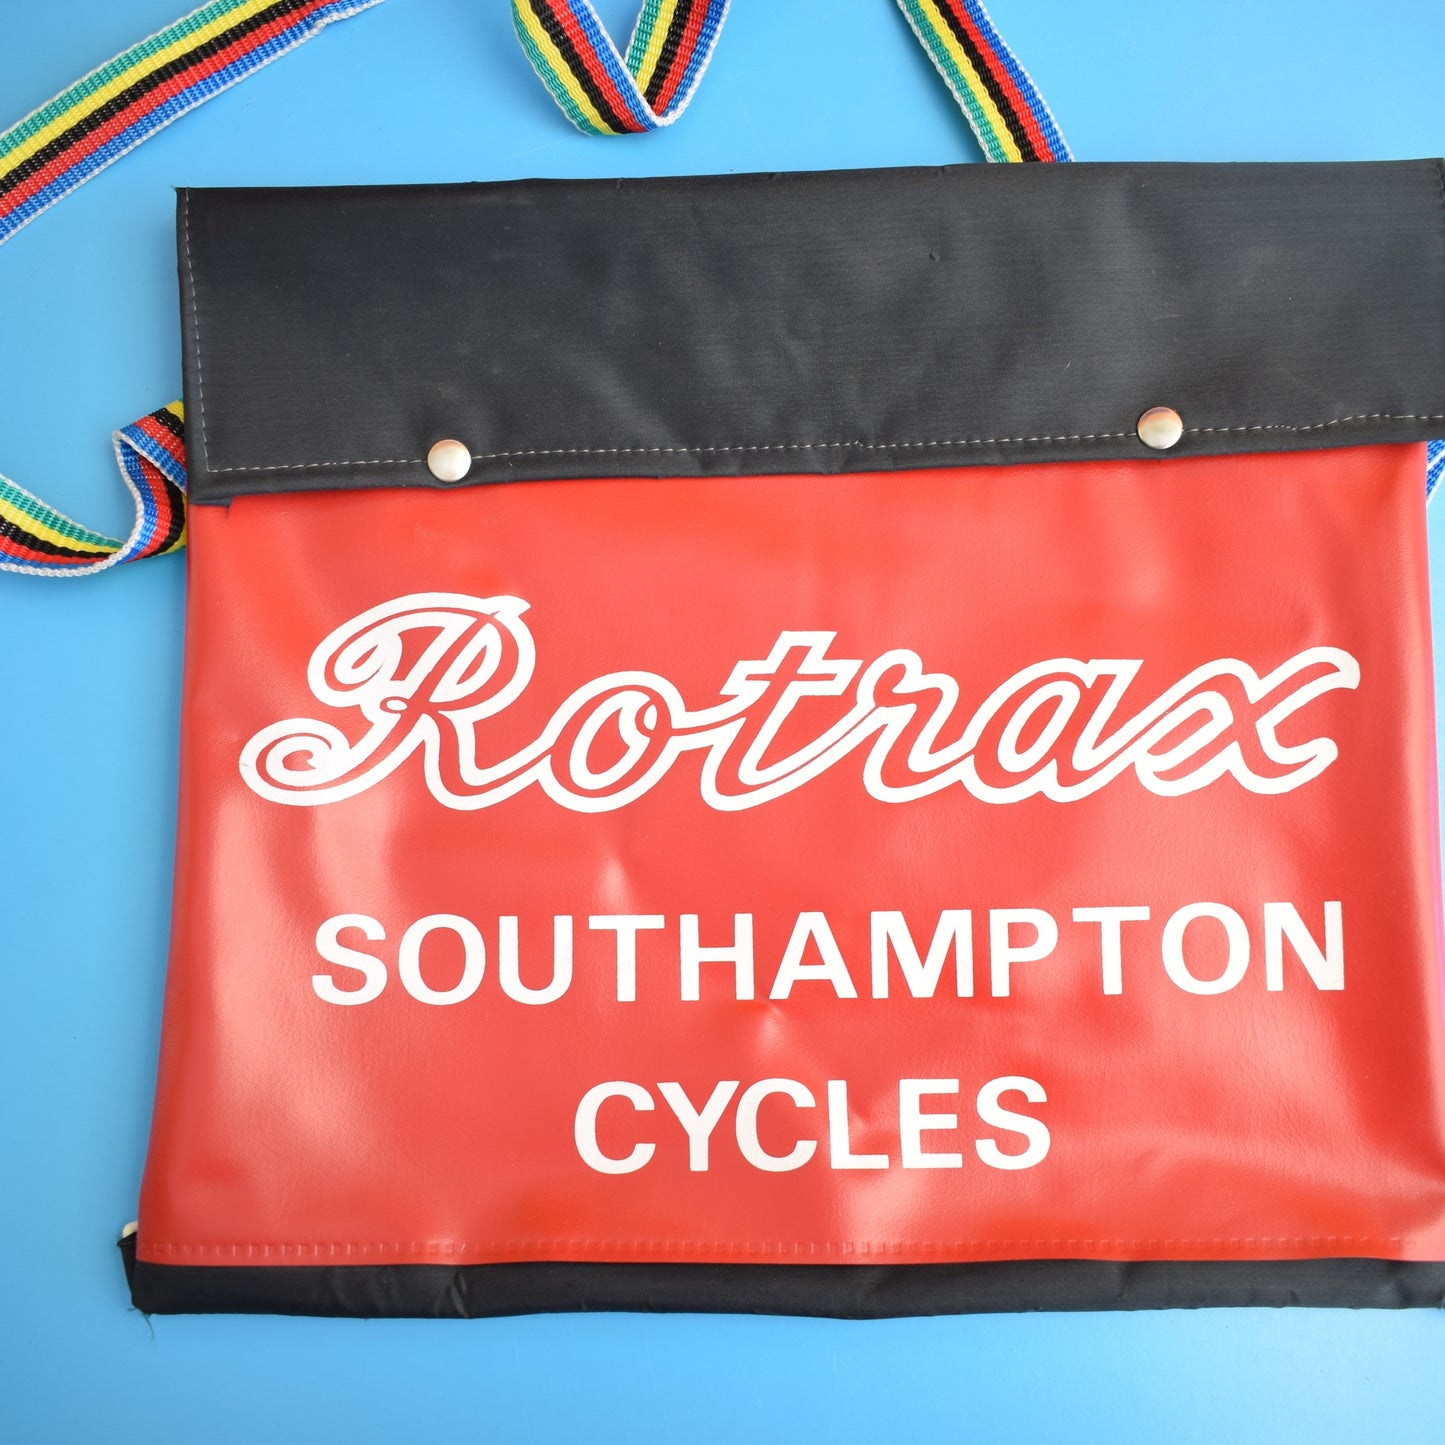 Vintage 1970s Cycle Bags- Rotrax